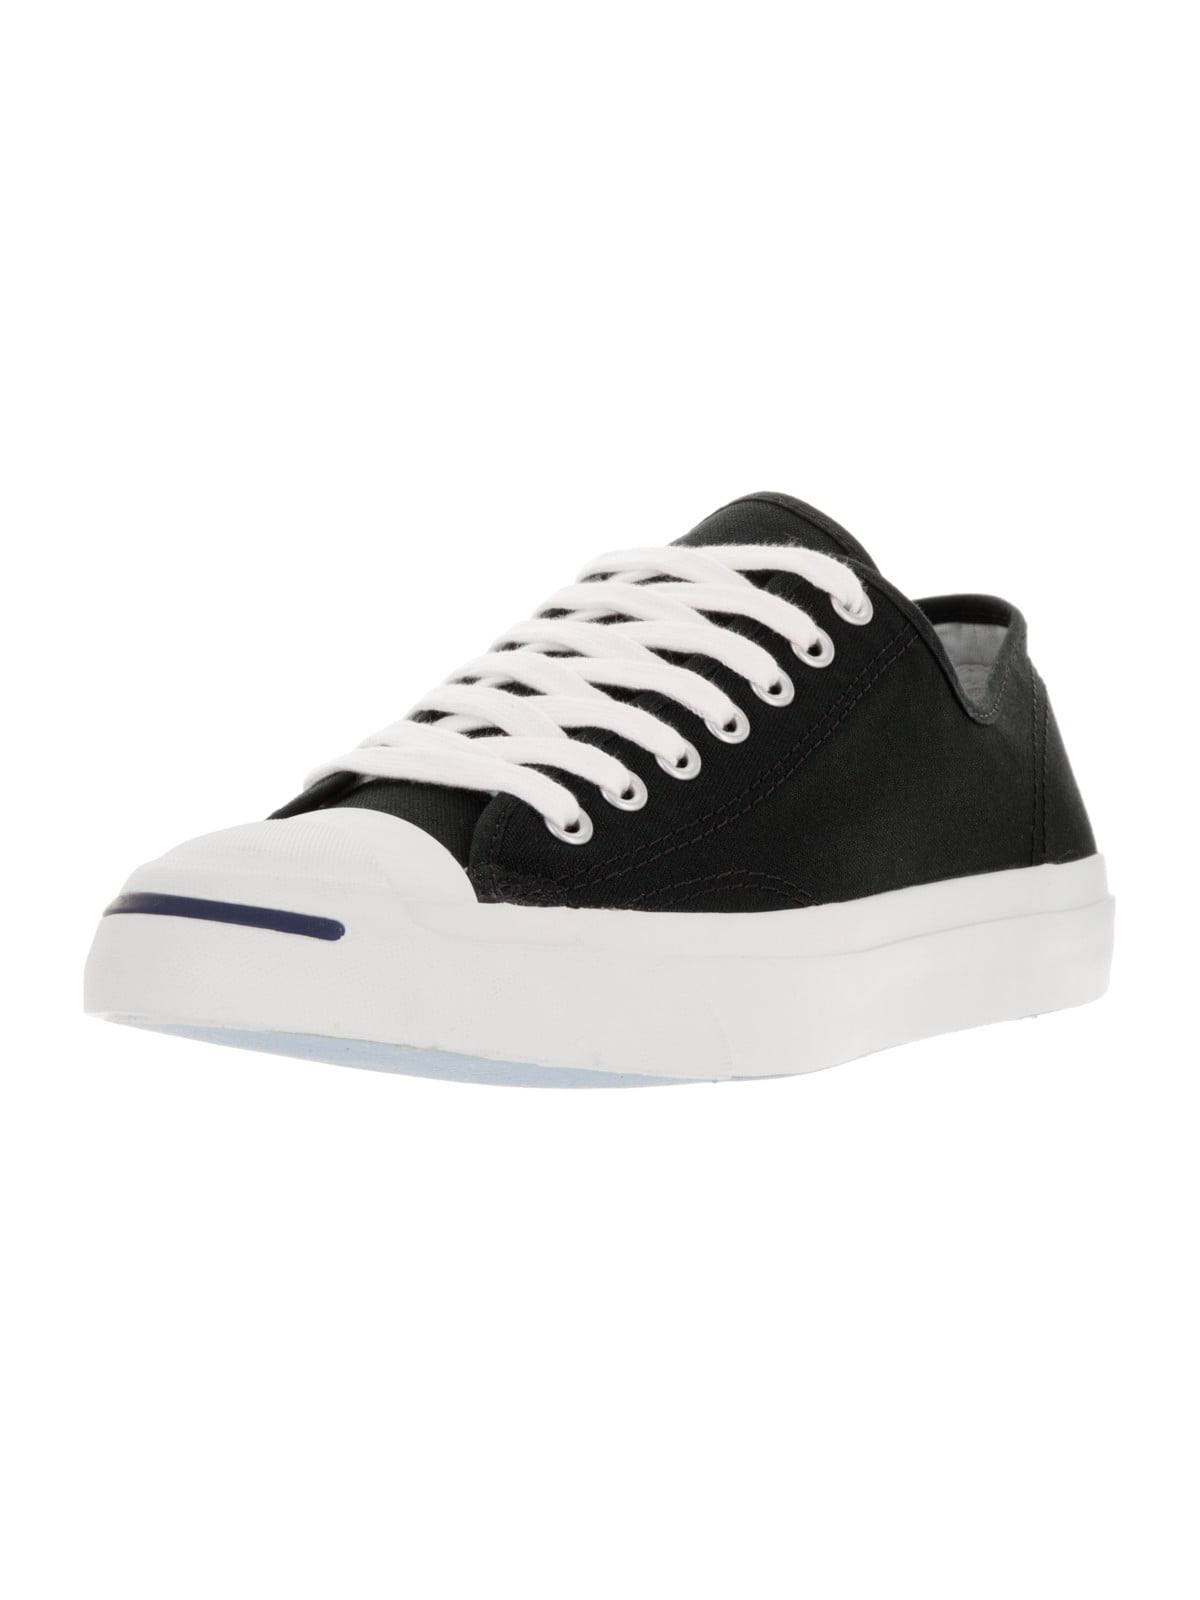 converse jack purcell ox white ultra